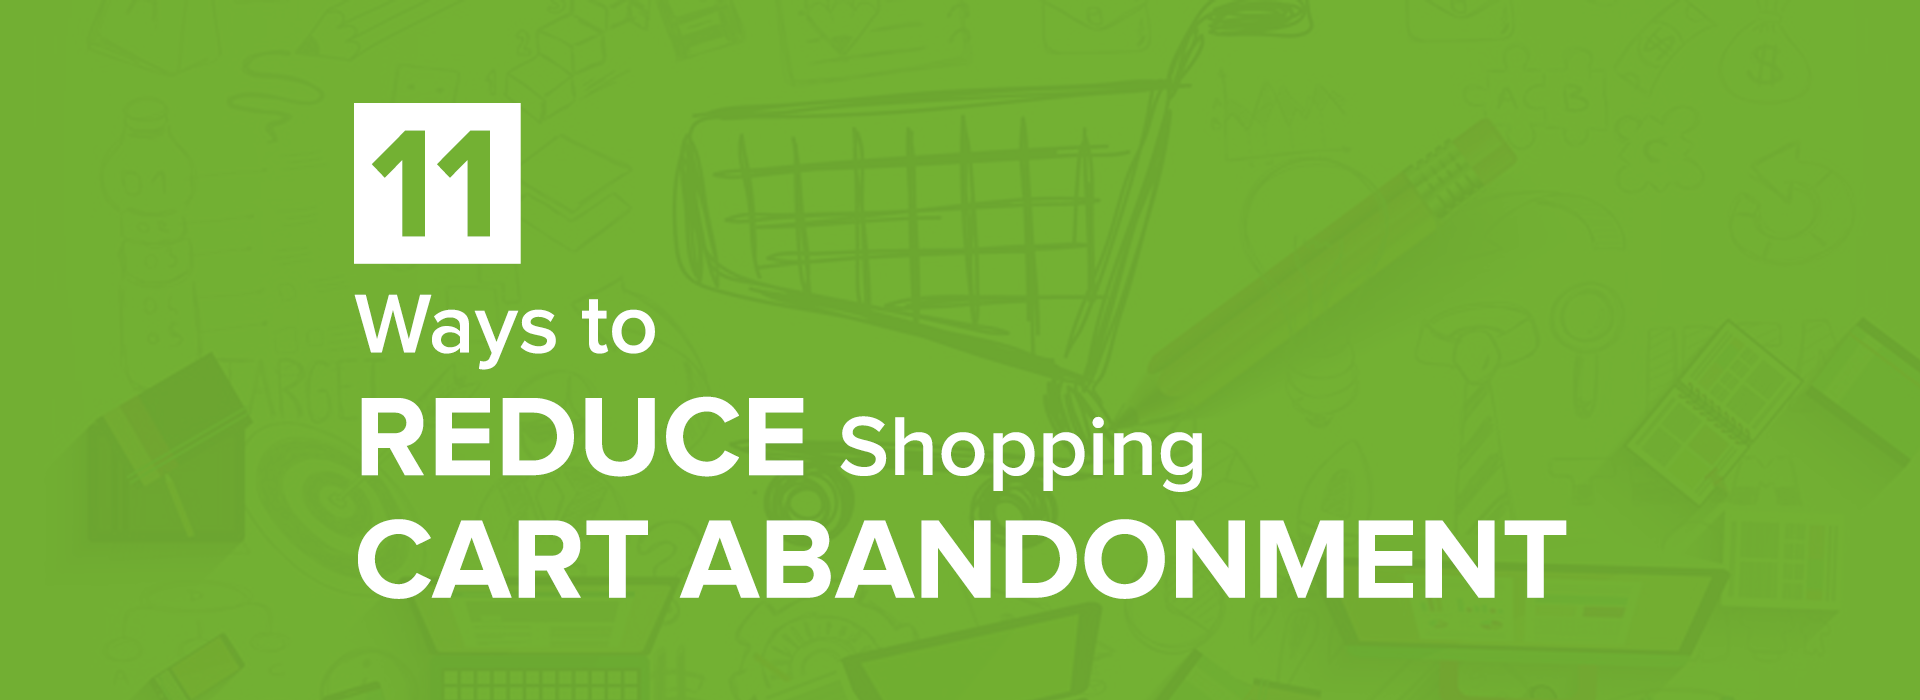 Eleven-Ways-to-Reduce-Shopping-Cart-Abandonment